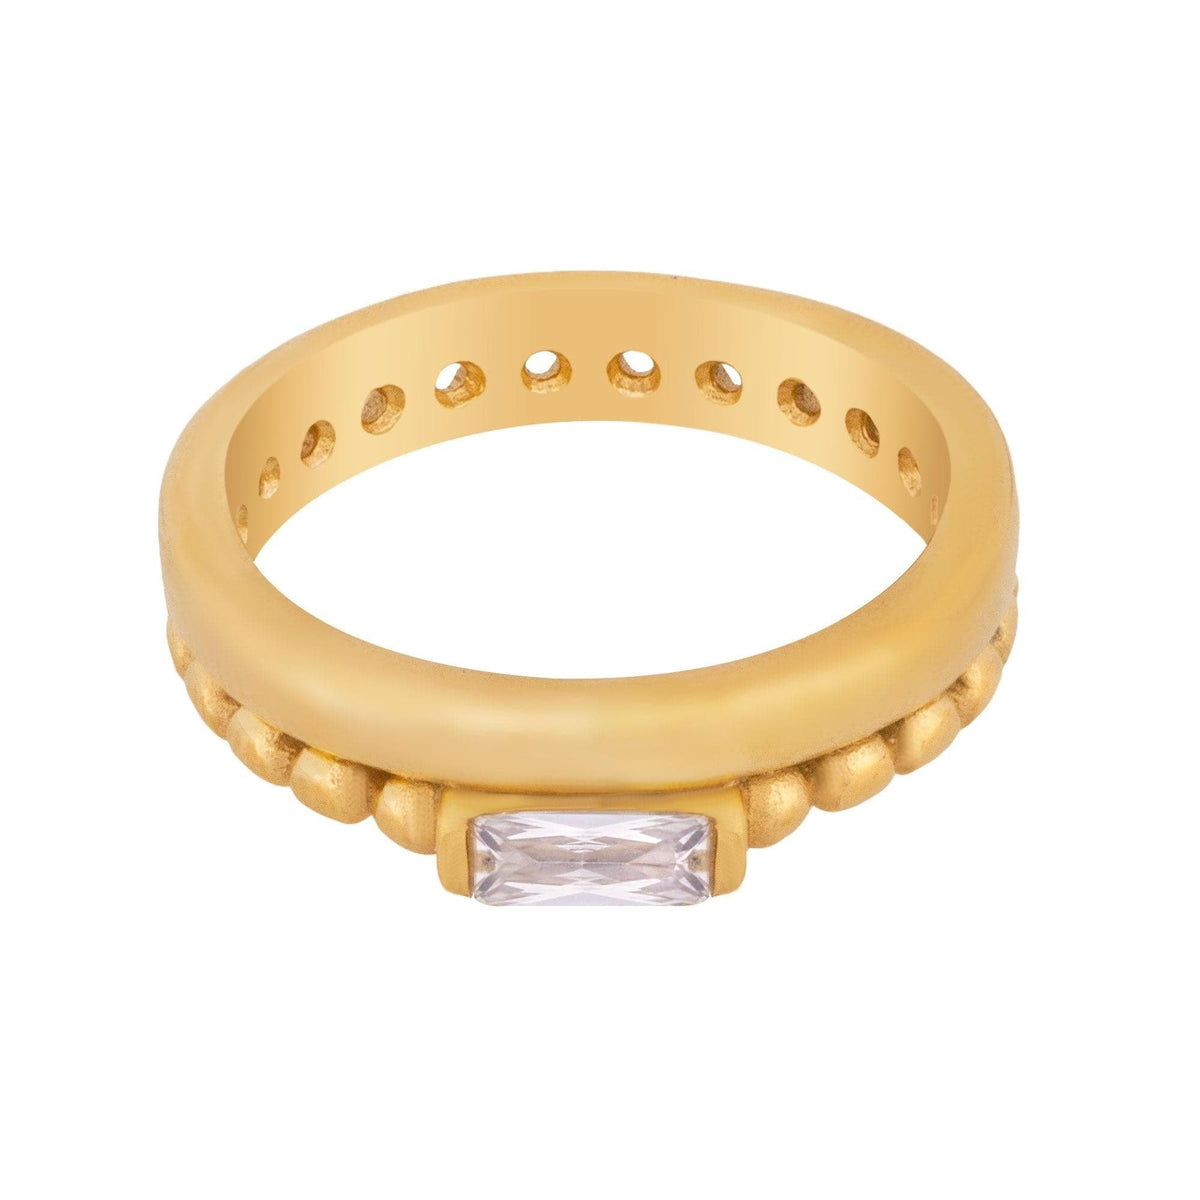 BohoMoon Stainless Steel Myla Ring Gold / US 5 / UK J / EUR 49 (x small)